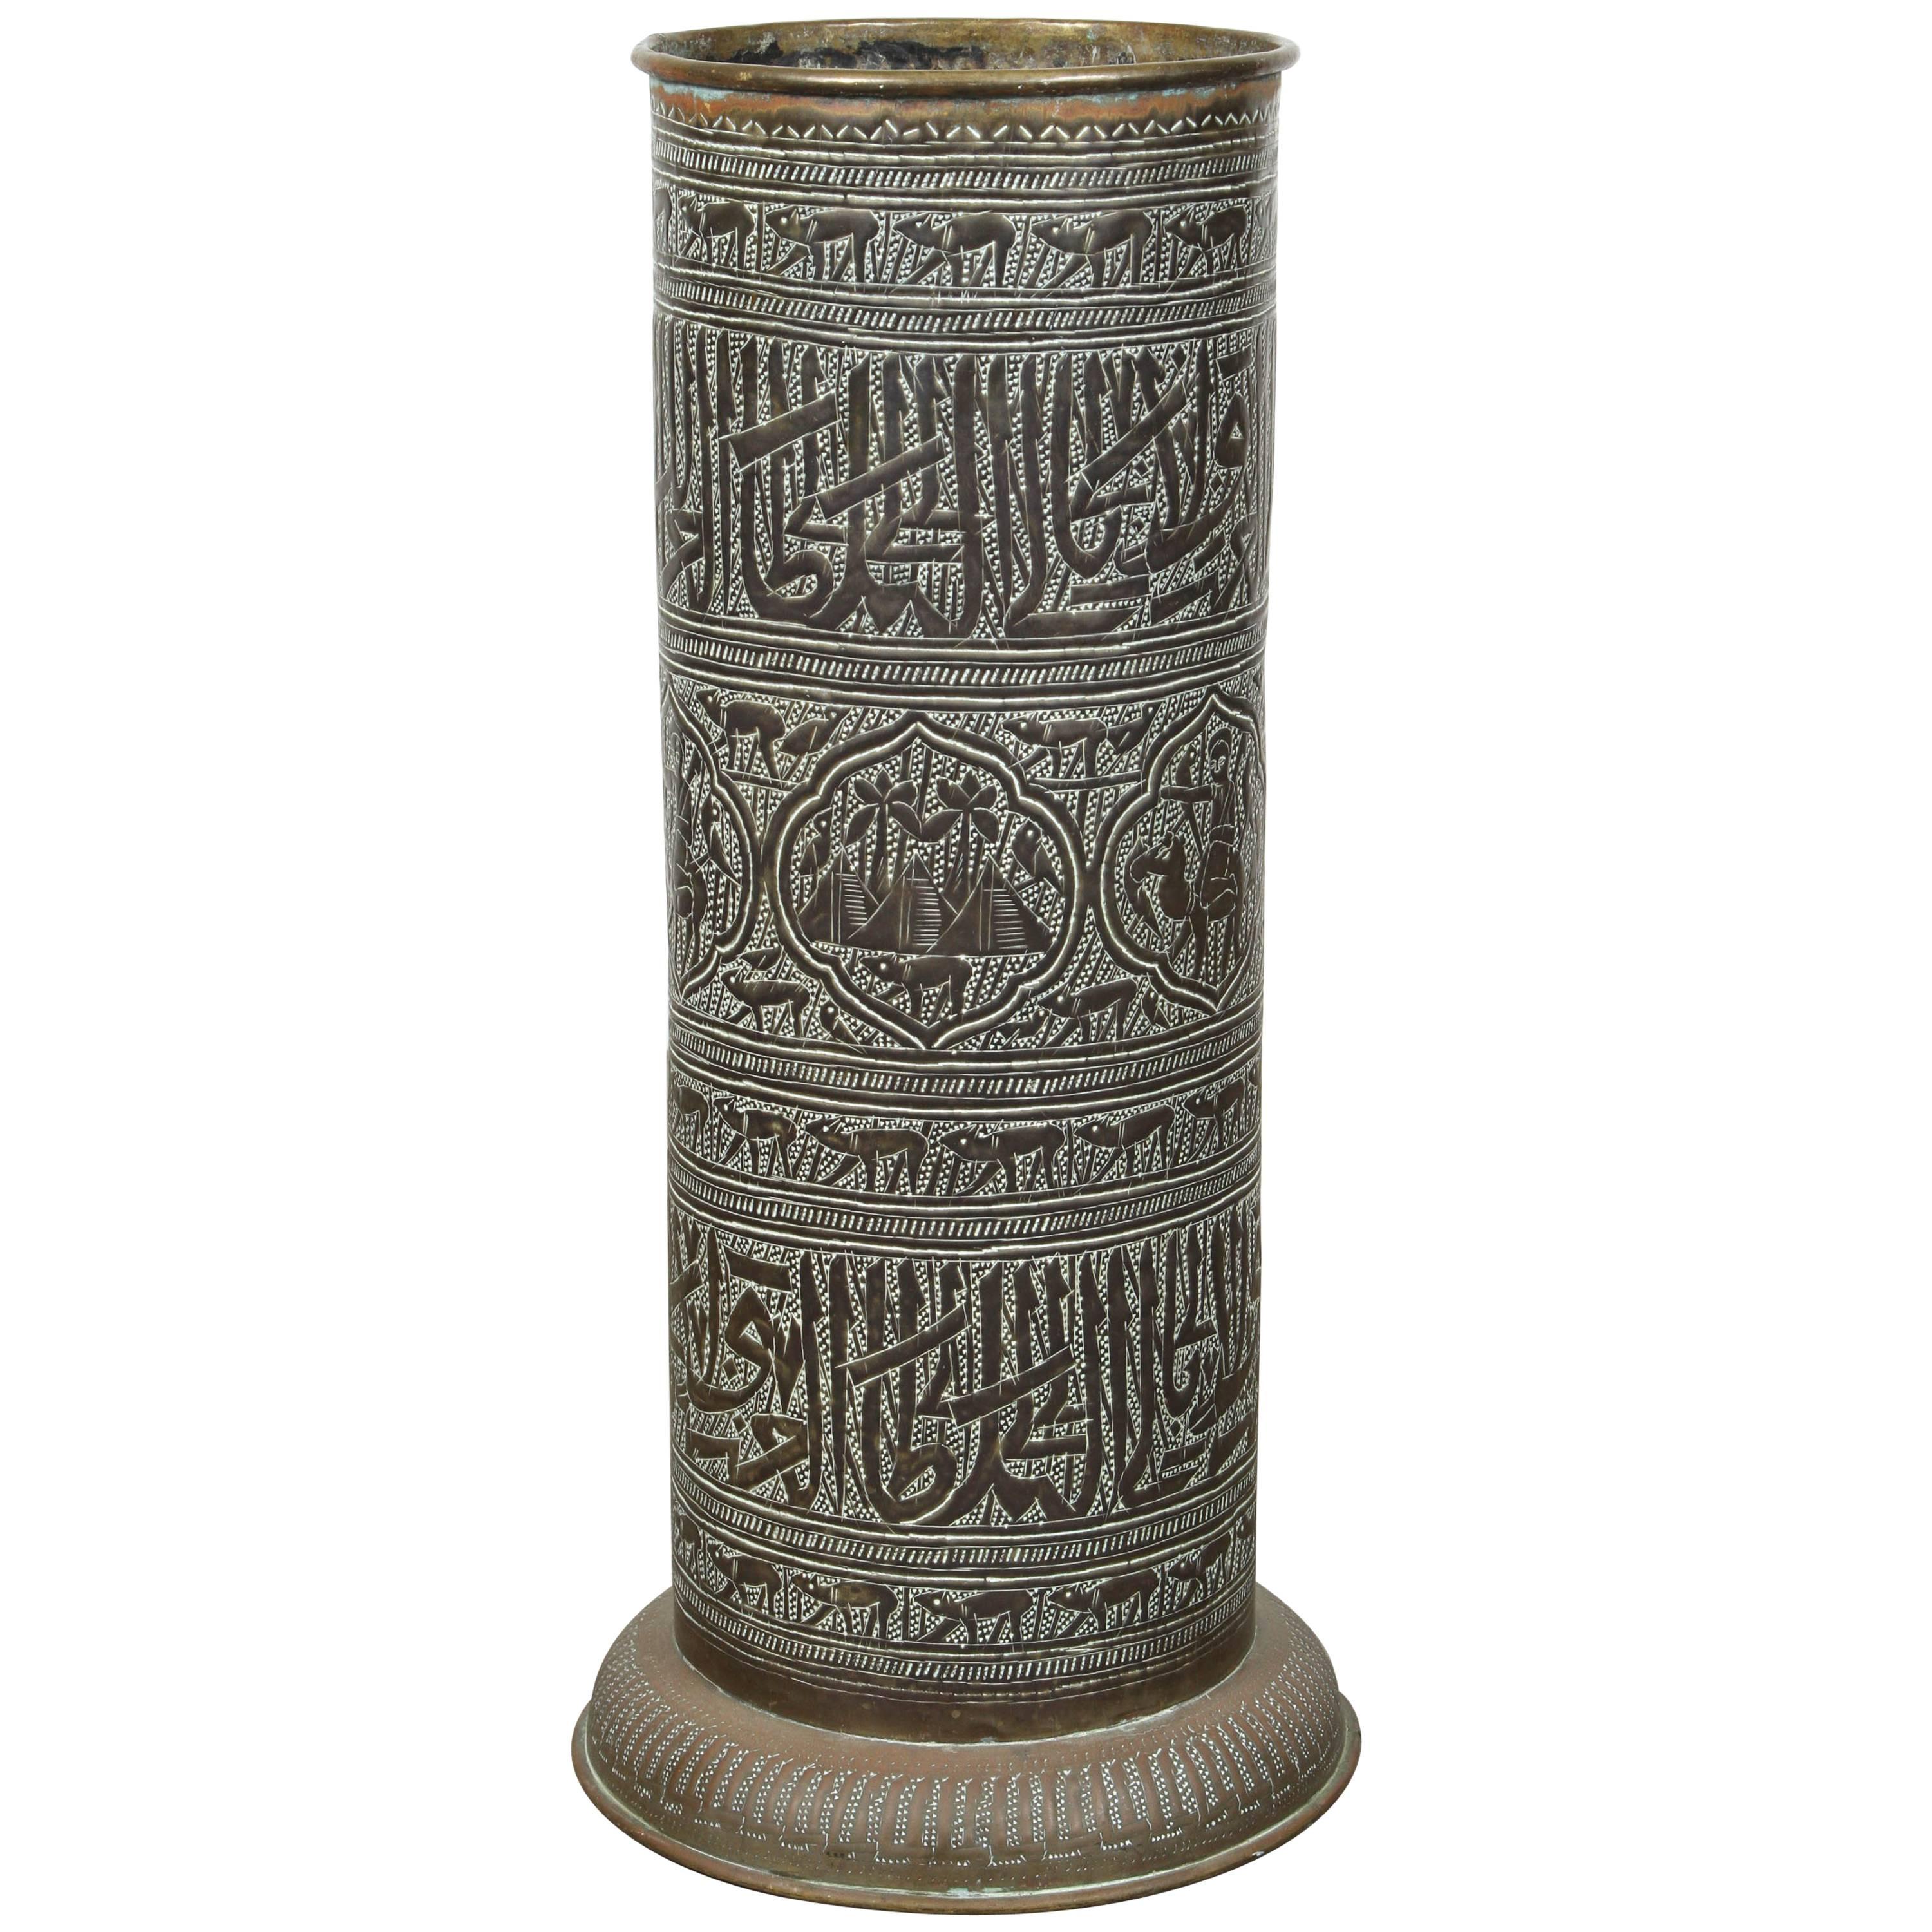 Brass Umbrella Stand with Islamic Calligraphy Writing